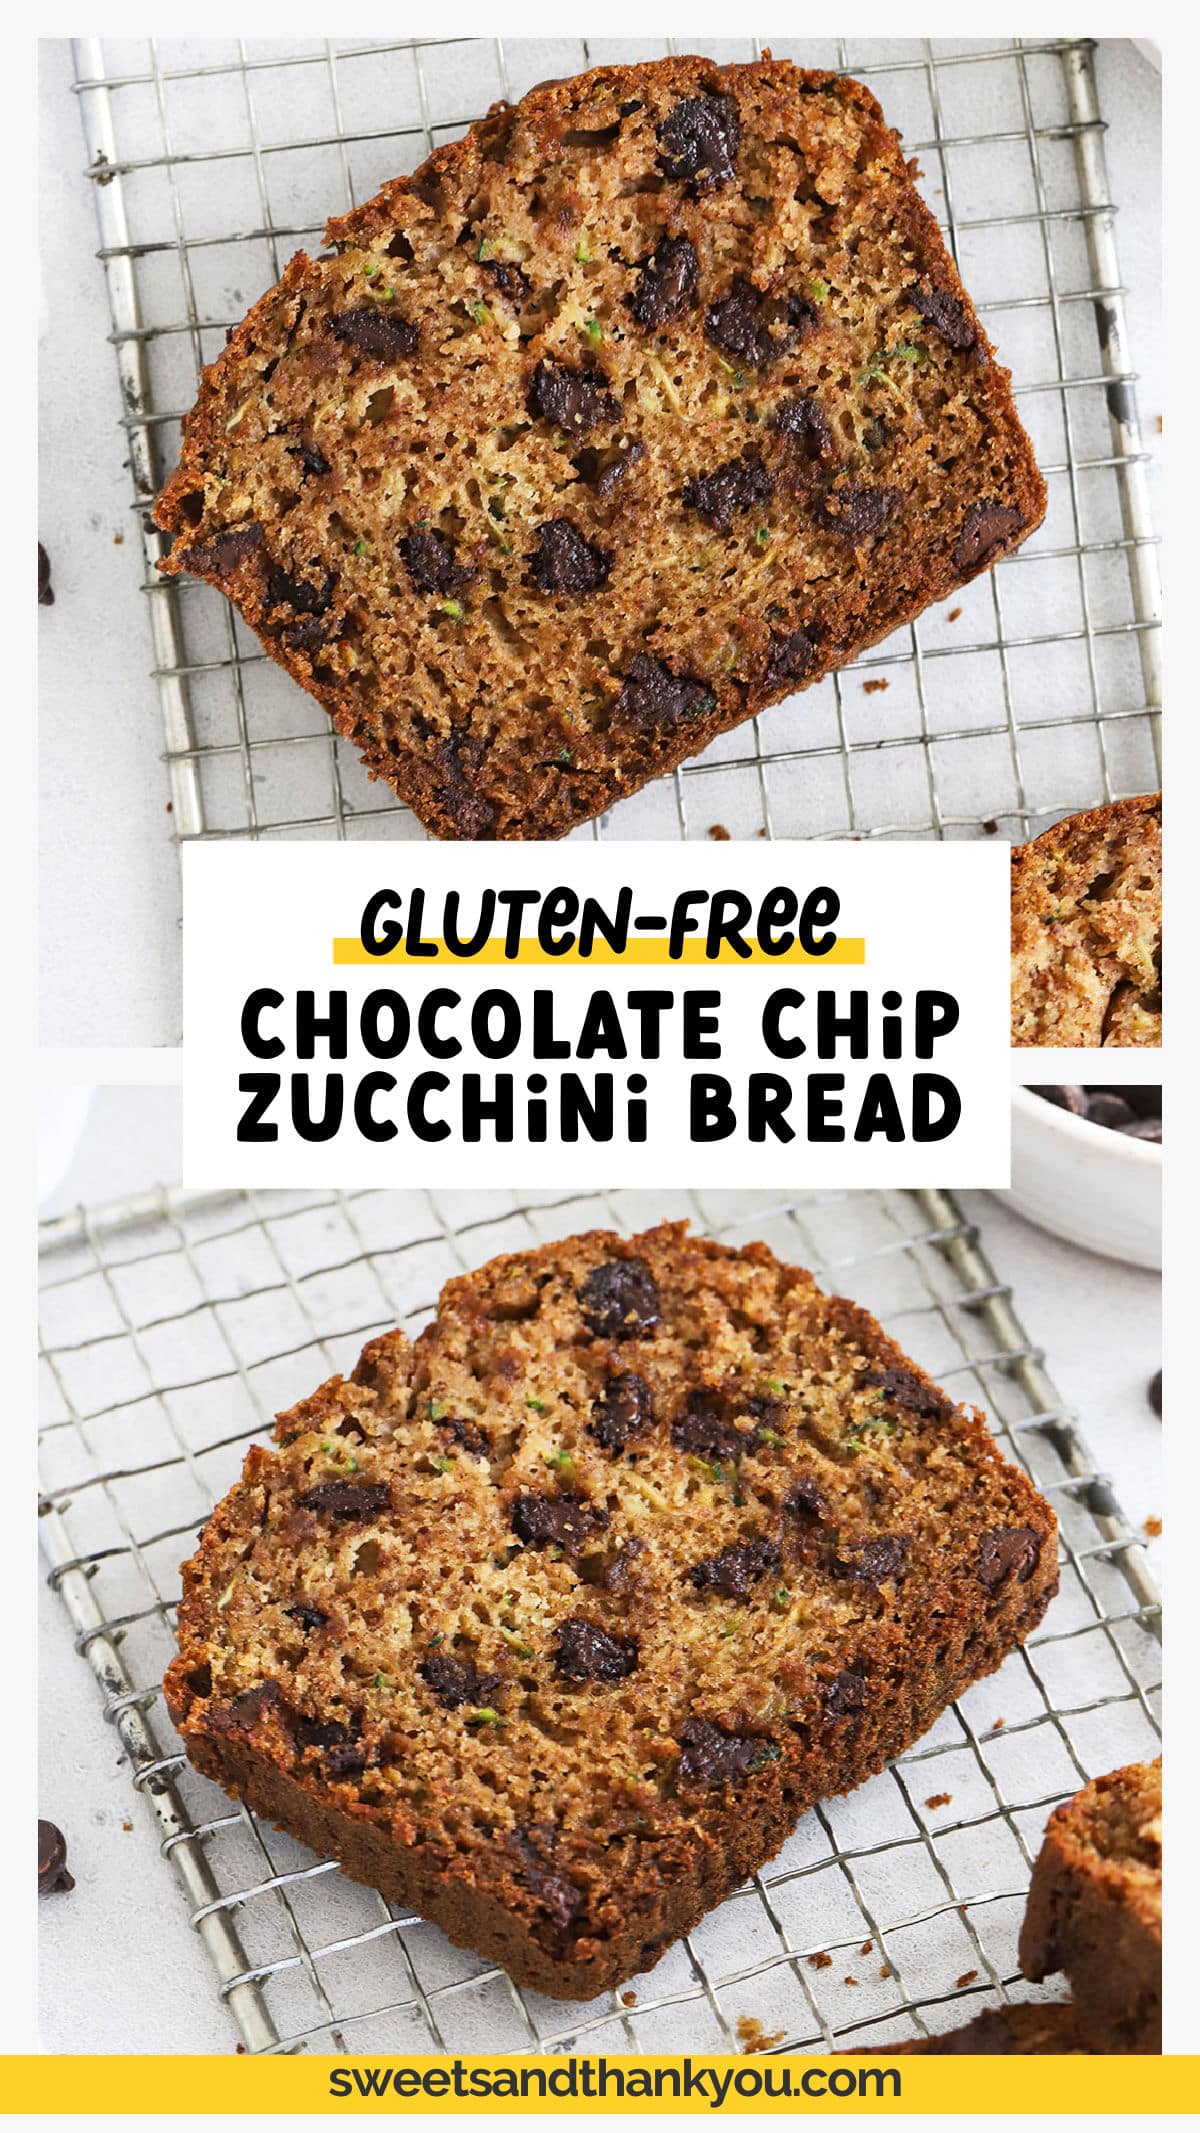 Summer is the perfect time to make this easy gluten-free zucchini bread recipe! You'll love the blend of spices, soft texture, and chocolate chips (or nuts) in every bite! This easy gluten-free chocolate chip zucchini bread is made with simple ingredients & no special skills required! Not into chocolate chips? Try making your zucchini bread with walnuts instead! Get the recipe for this moist gluten free zucchini bread + more zucchini recipes to try at Sweets & Thank You